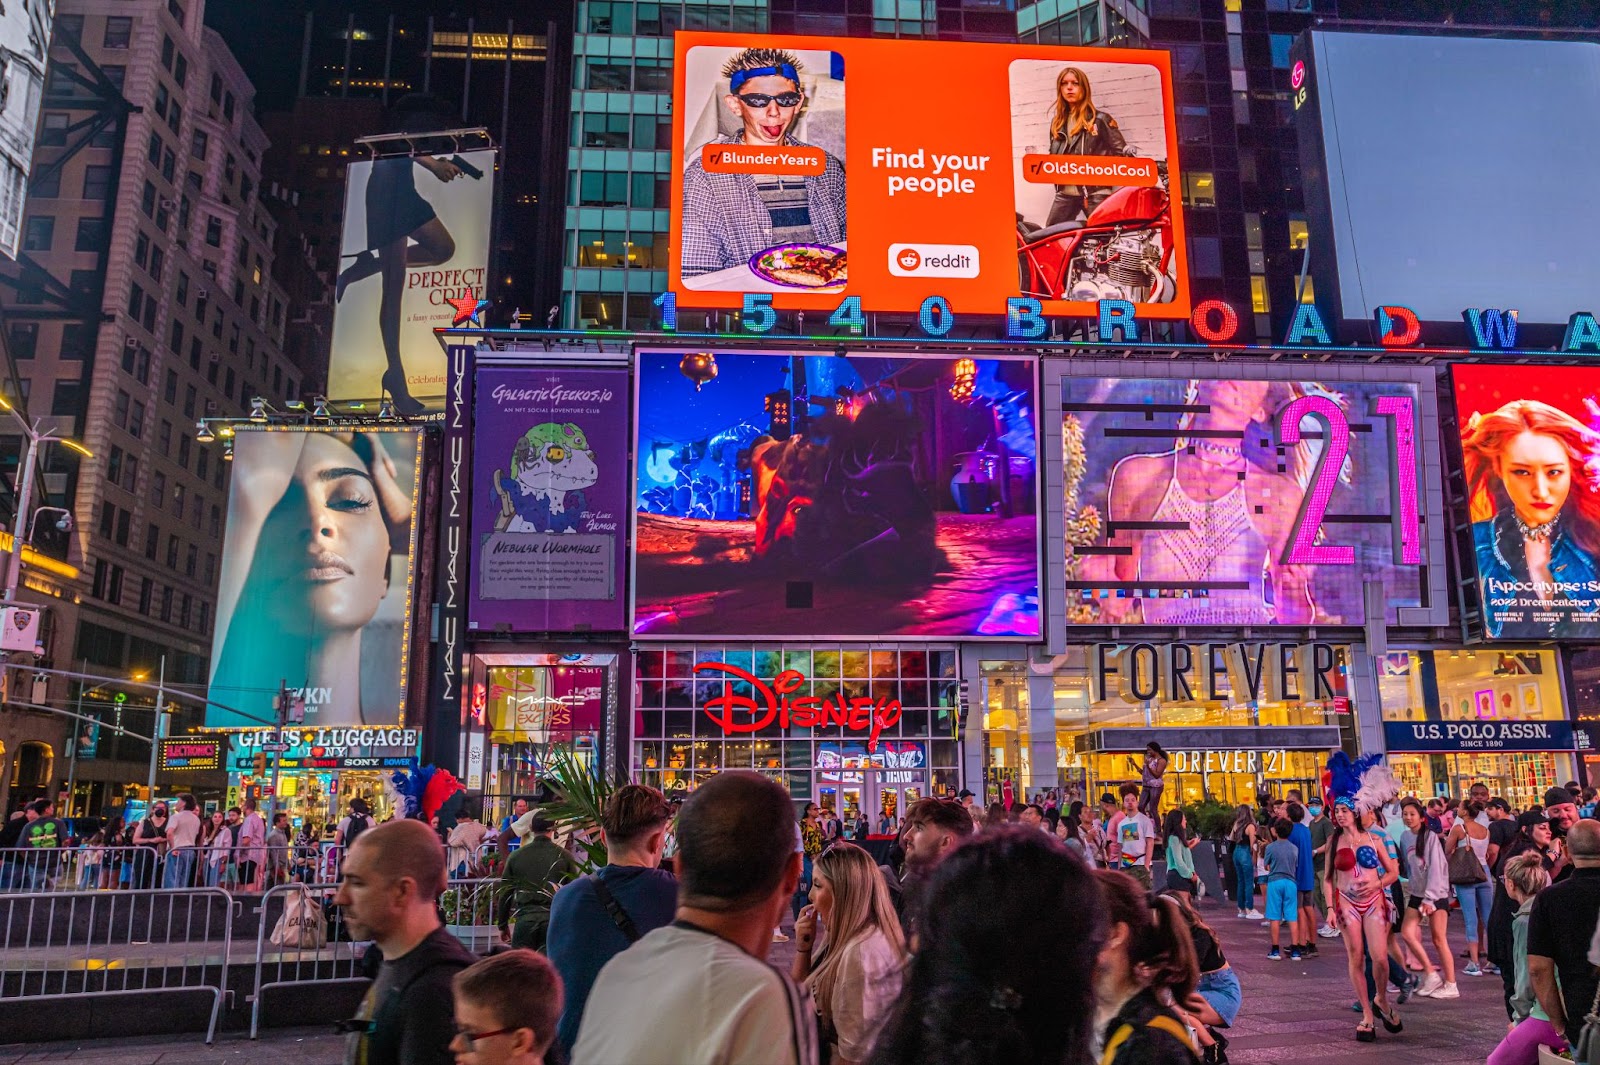 Reddit advertisement featuring r/BlunderYears and r/OldSchoolCool in New York Times Square